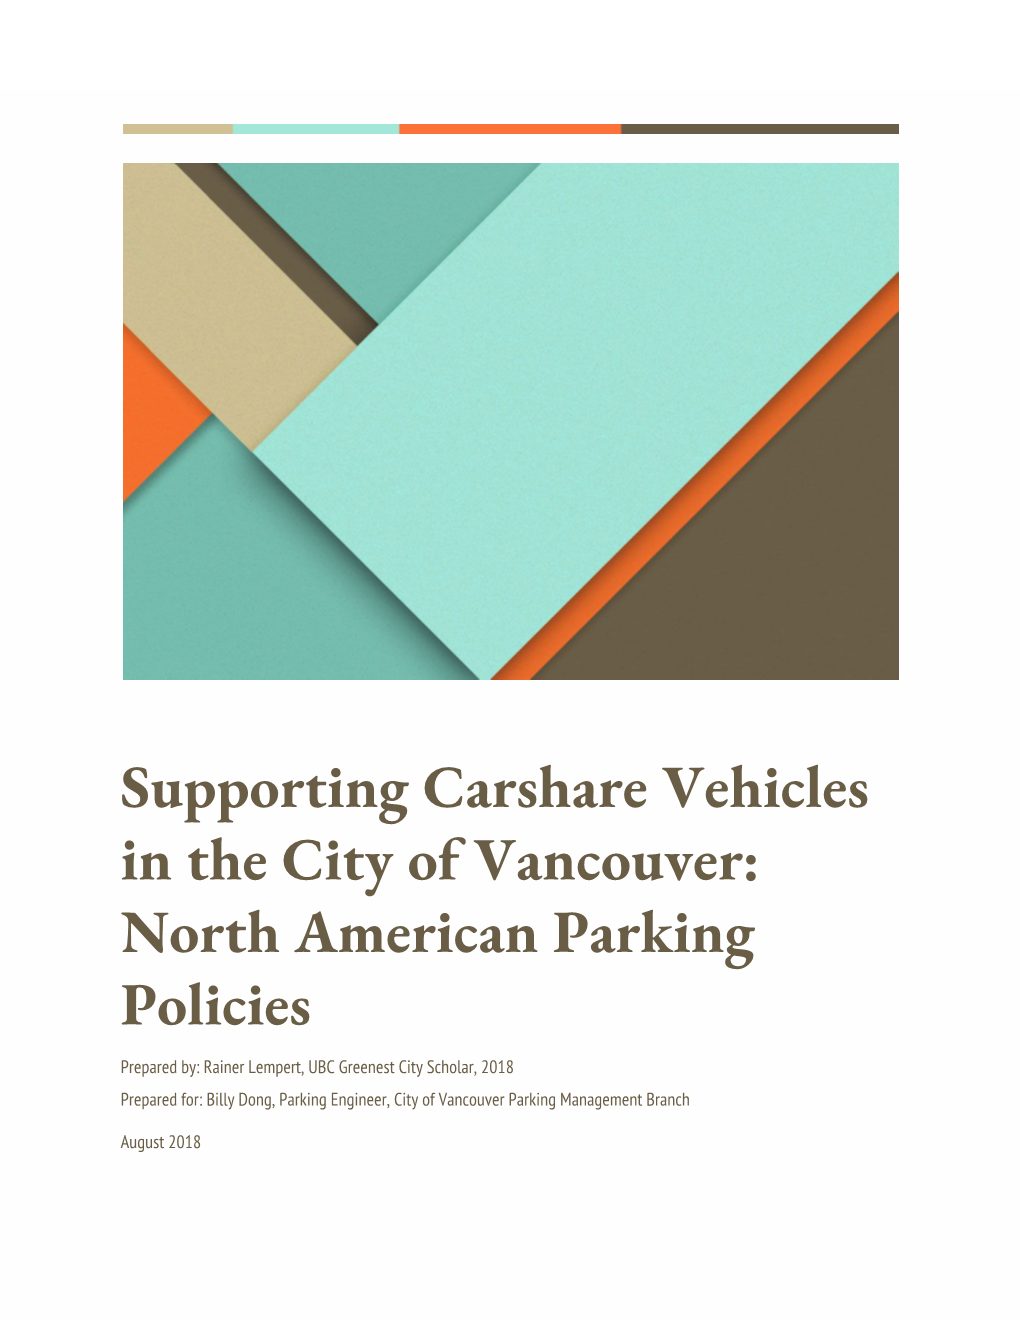 Supporting Carshare Vehicles in the City of Vancouver: North American